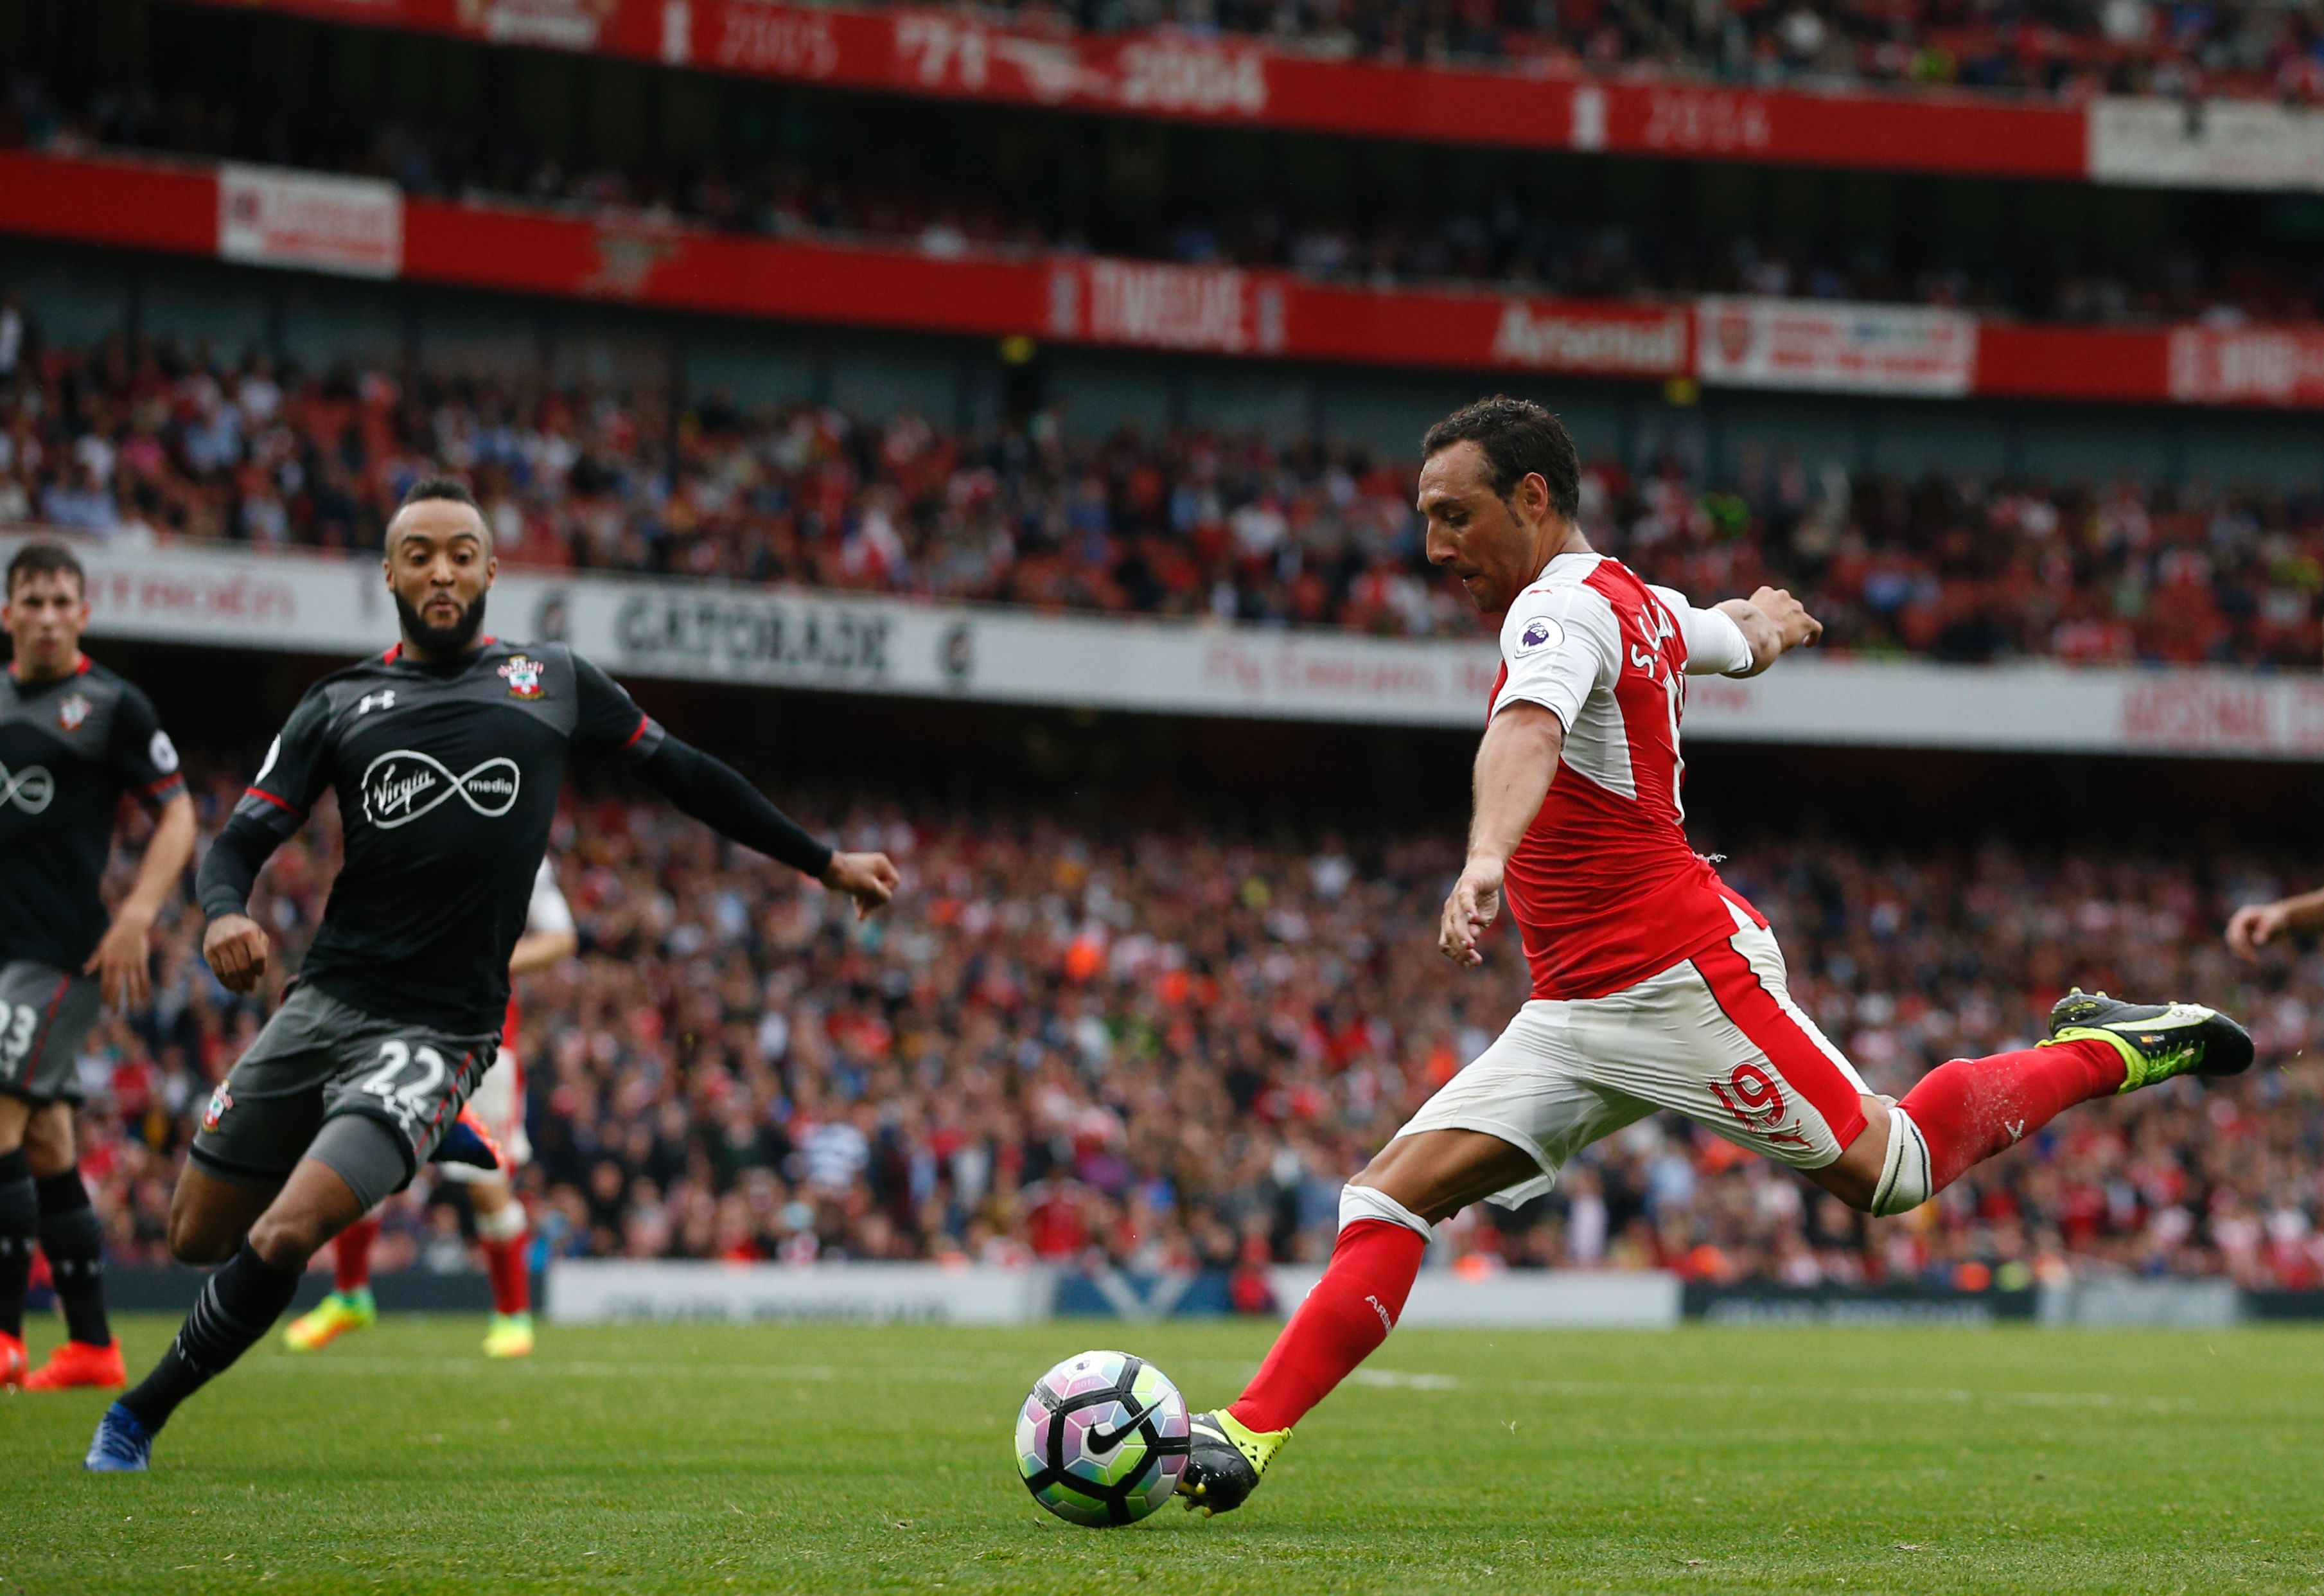 Arsenal's Spanish midfielder Santi Cazorla (R) crosses the ball during the English Premier League football match between Arsenal and Southampton at the Emirates Stadium in London on September 10, 2016.  / AFP / Adrian DENNIS / RESTRICTED TO EDITORIAL USE. No use with unauthorized audio, video, data, fixture lists, club/league logos or 'live' services. Online in-match use limited to 75 images, no video emulation. No use in betting, games or single club/league/player publications.  /         (Photo credit should read ADRIAN DENNIS/AFP/Getty Images)